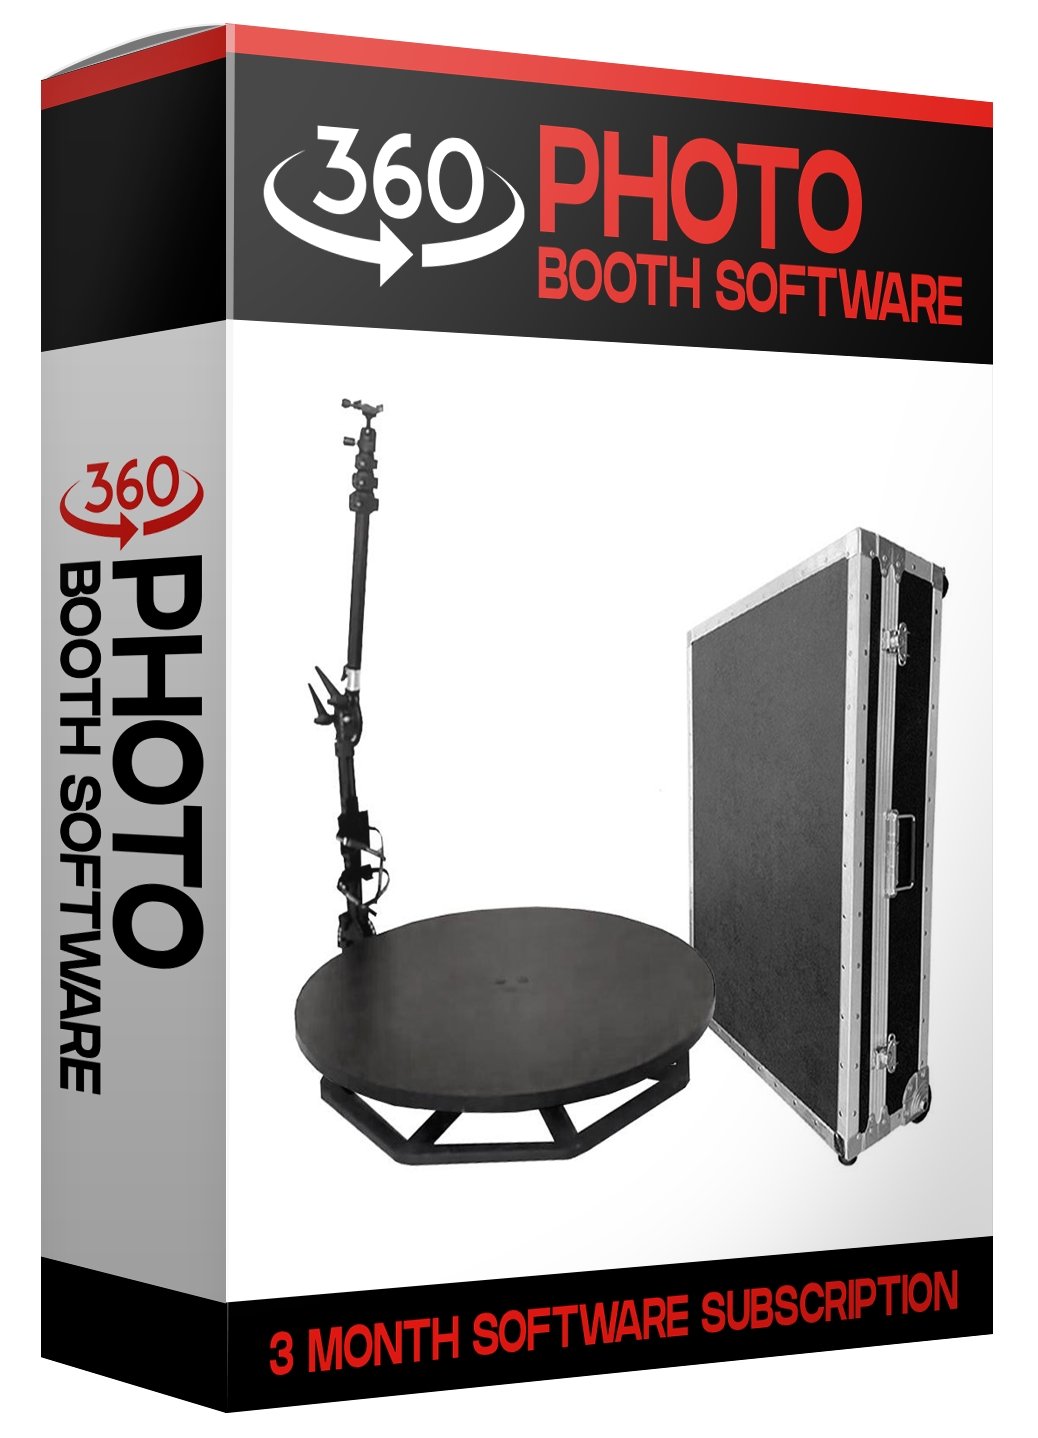 REVOSPIN OM-4 OCTAGON 360 PHOTO BOOTH ELITE PACKAGE (MANUAL SPIN) - VS Booths 360